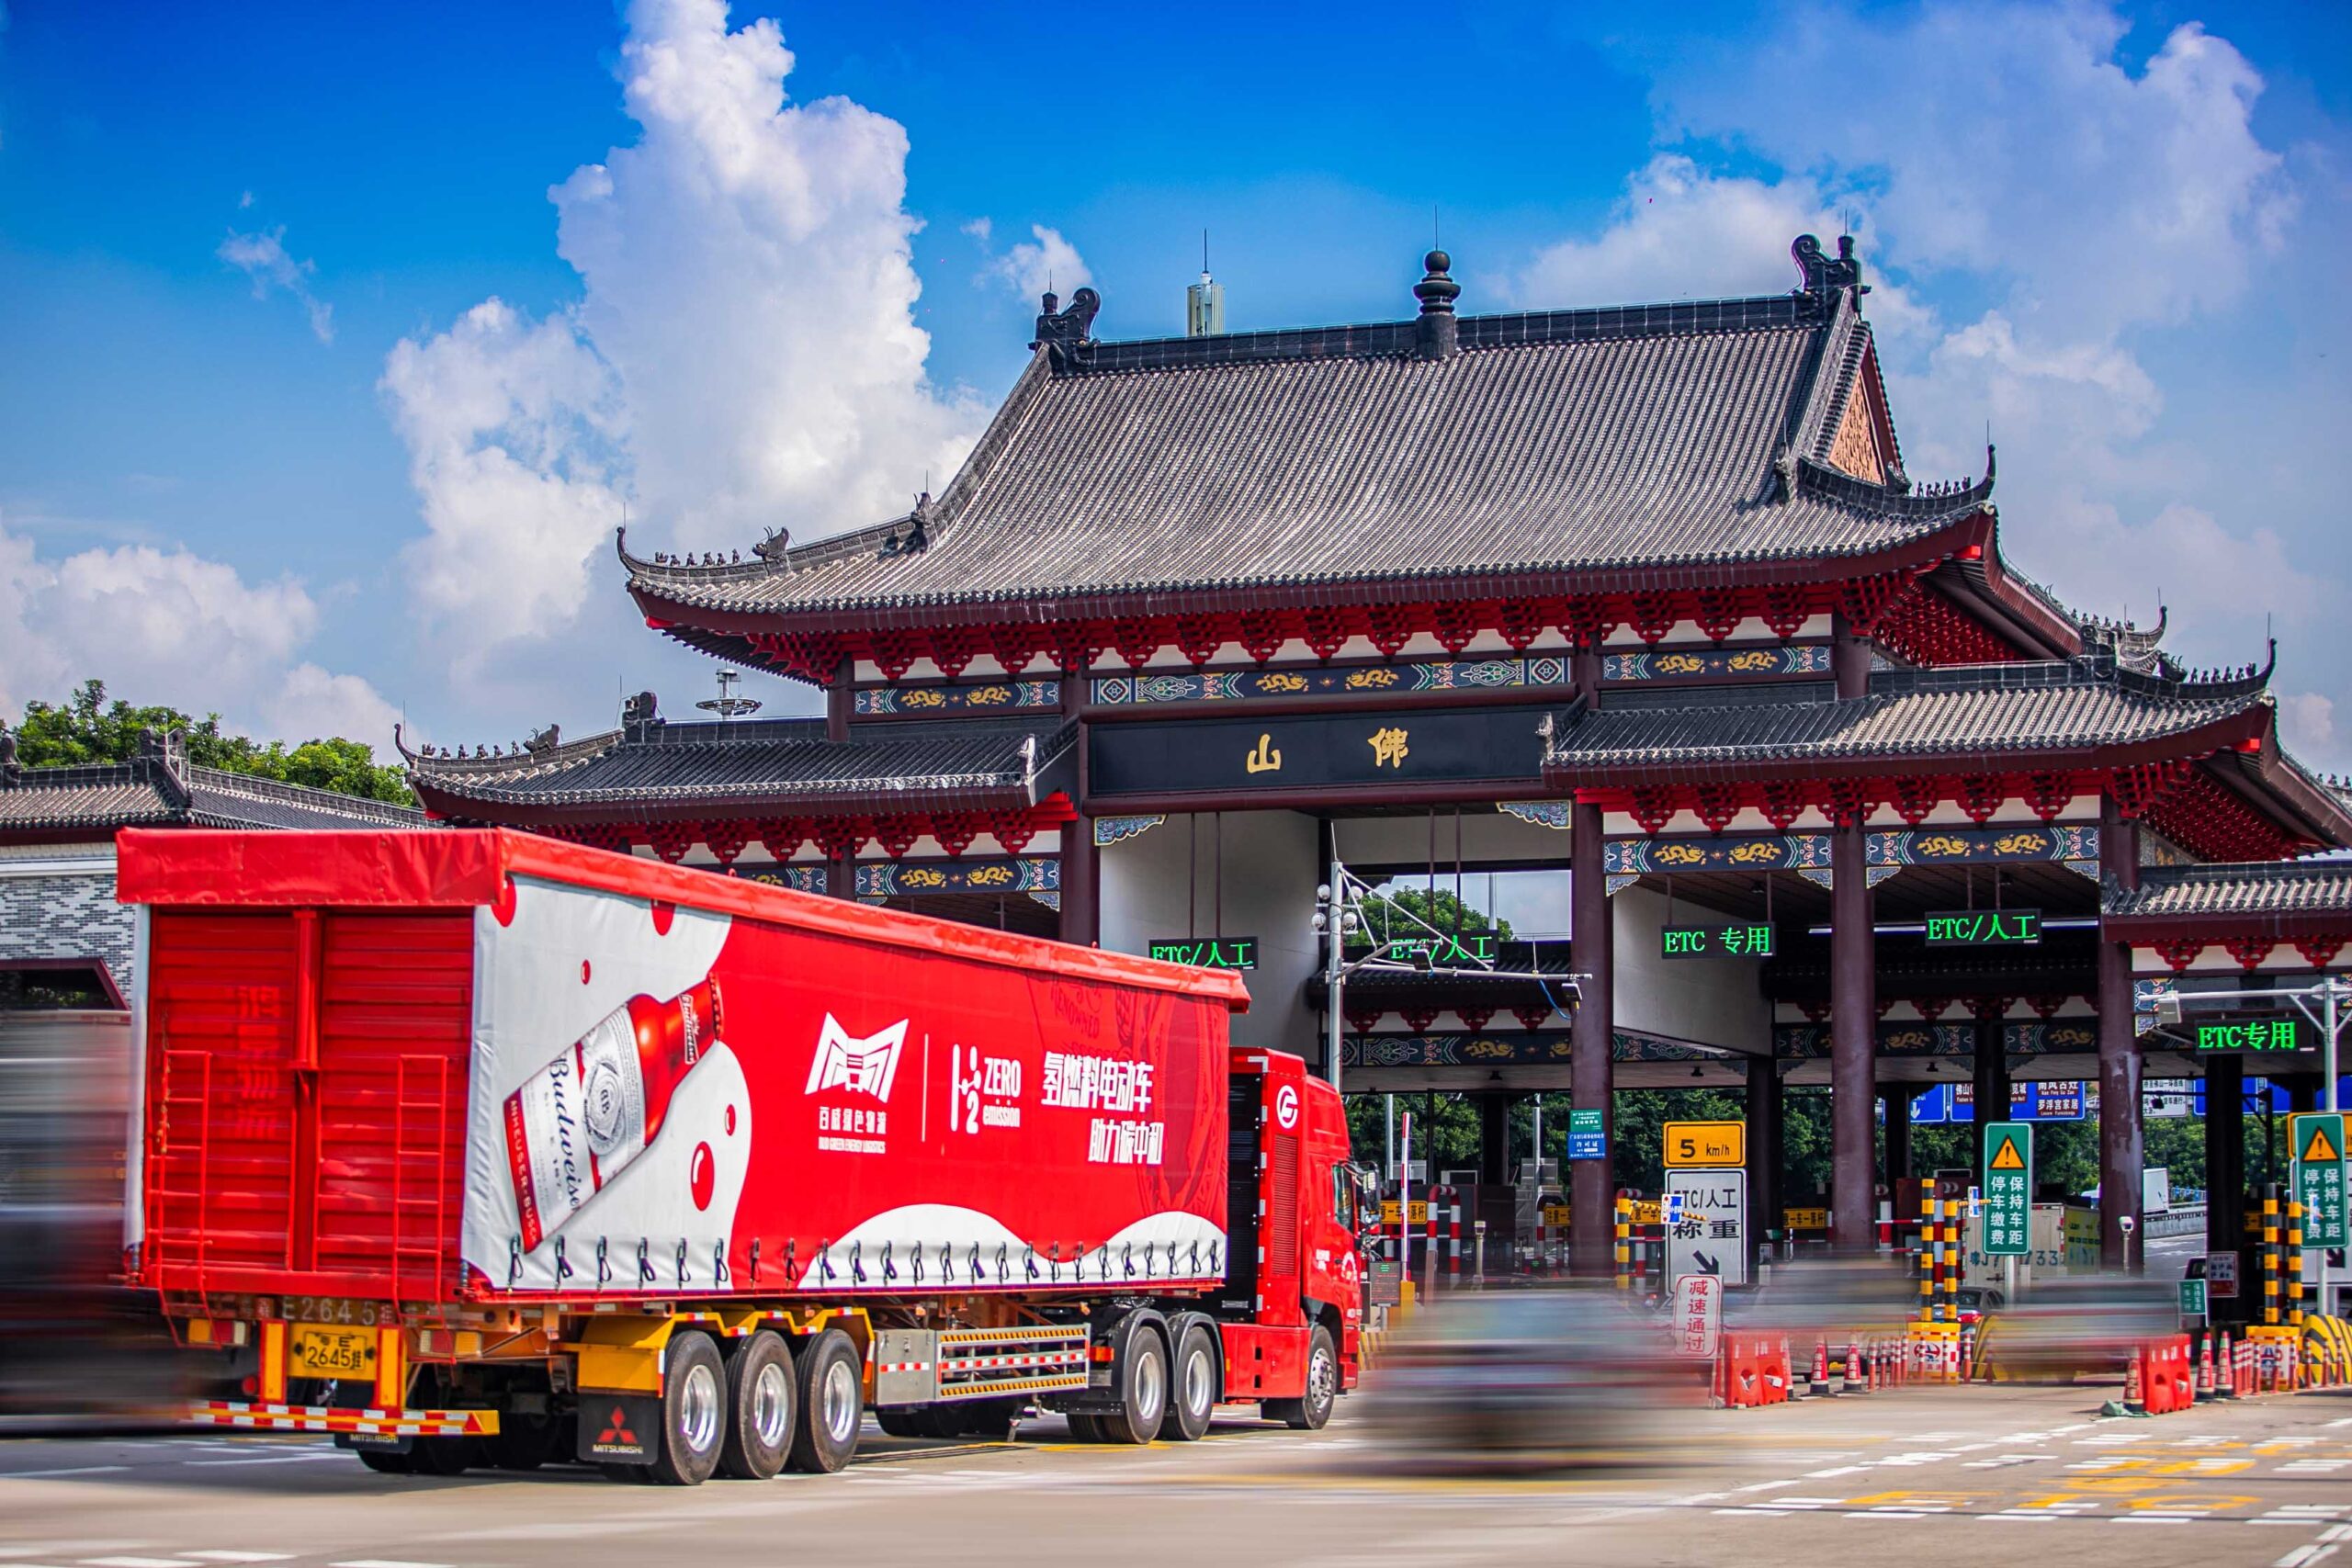 Budweiser APAC beer truck in China